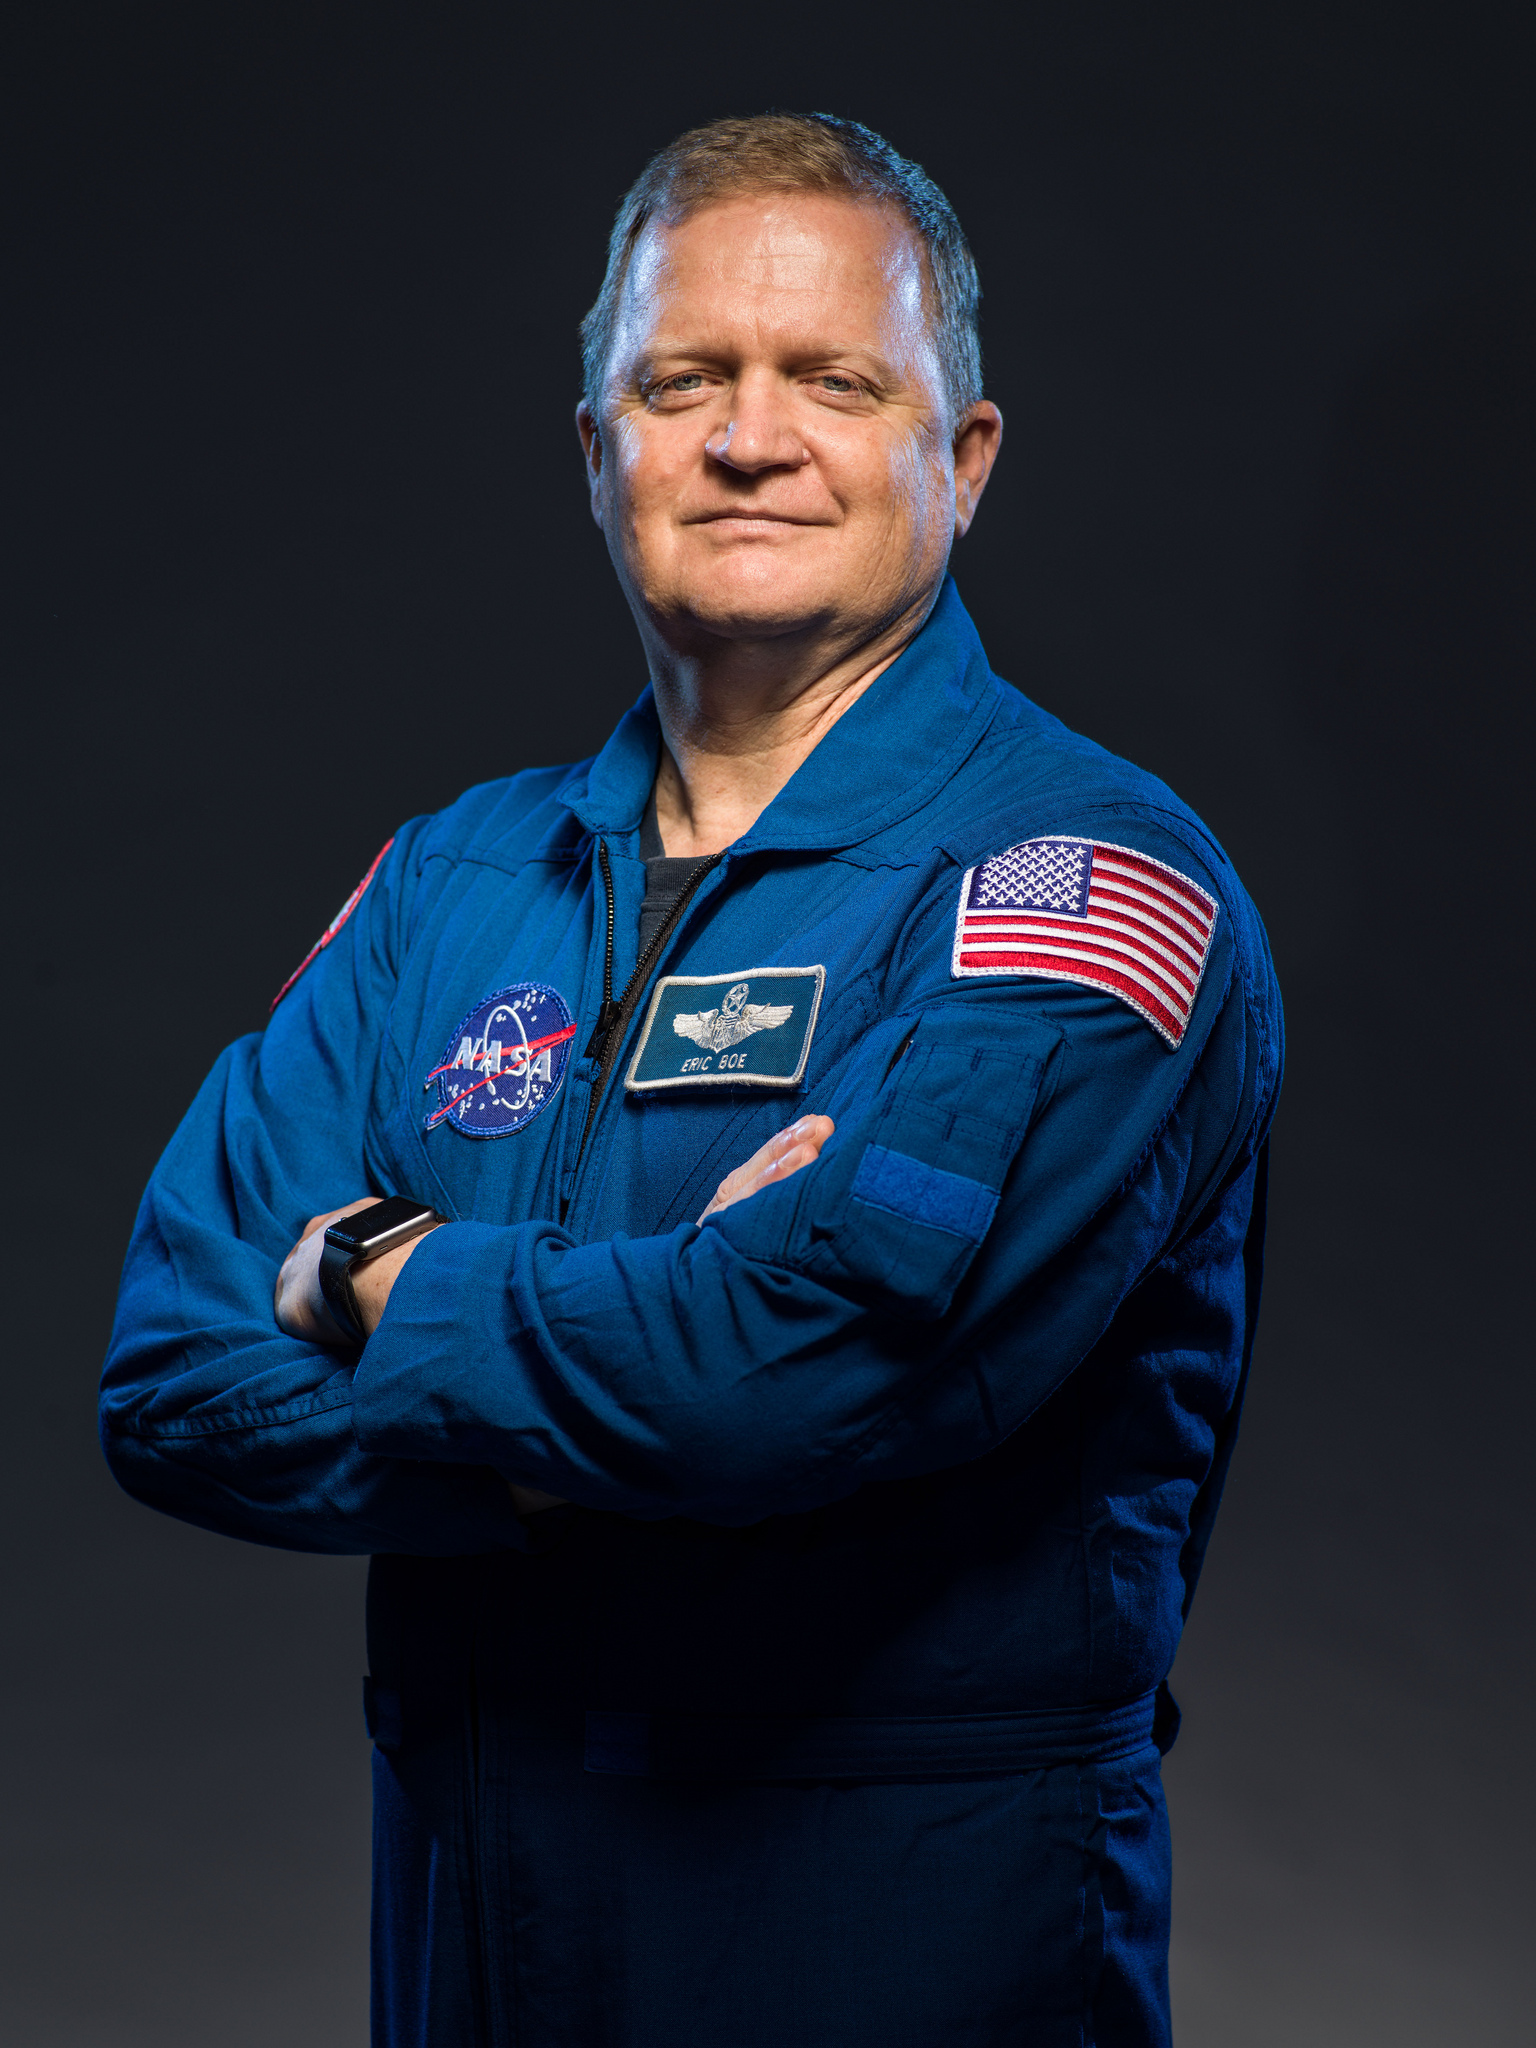 Eric Boe will fly on Boeing's first Commercial Crew test vehicle in 2019. Photo: NASA